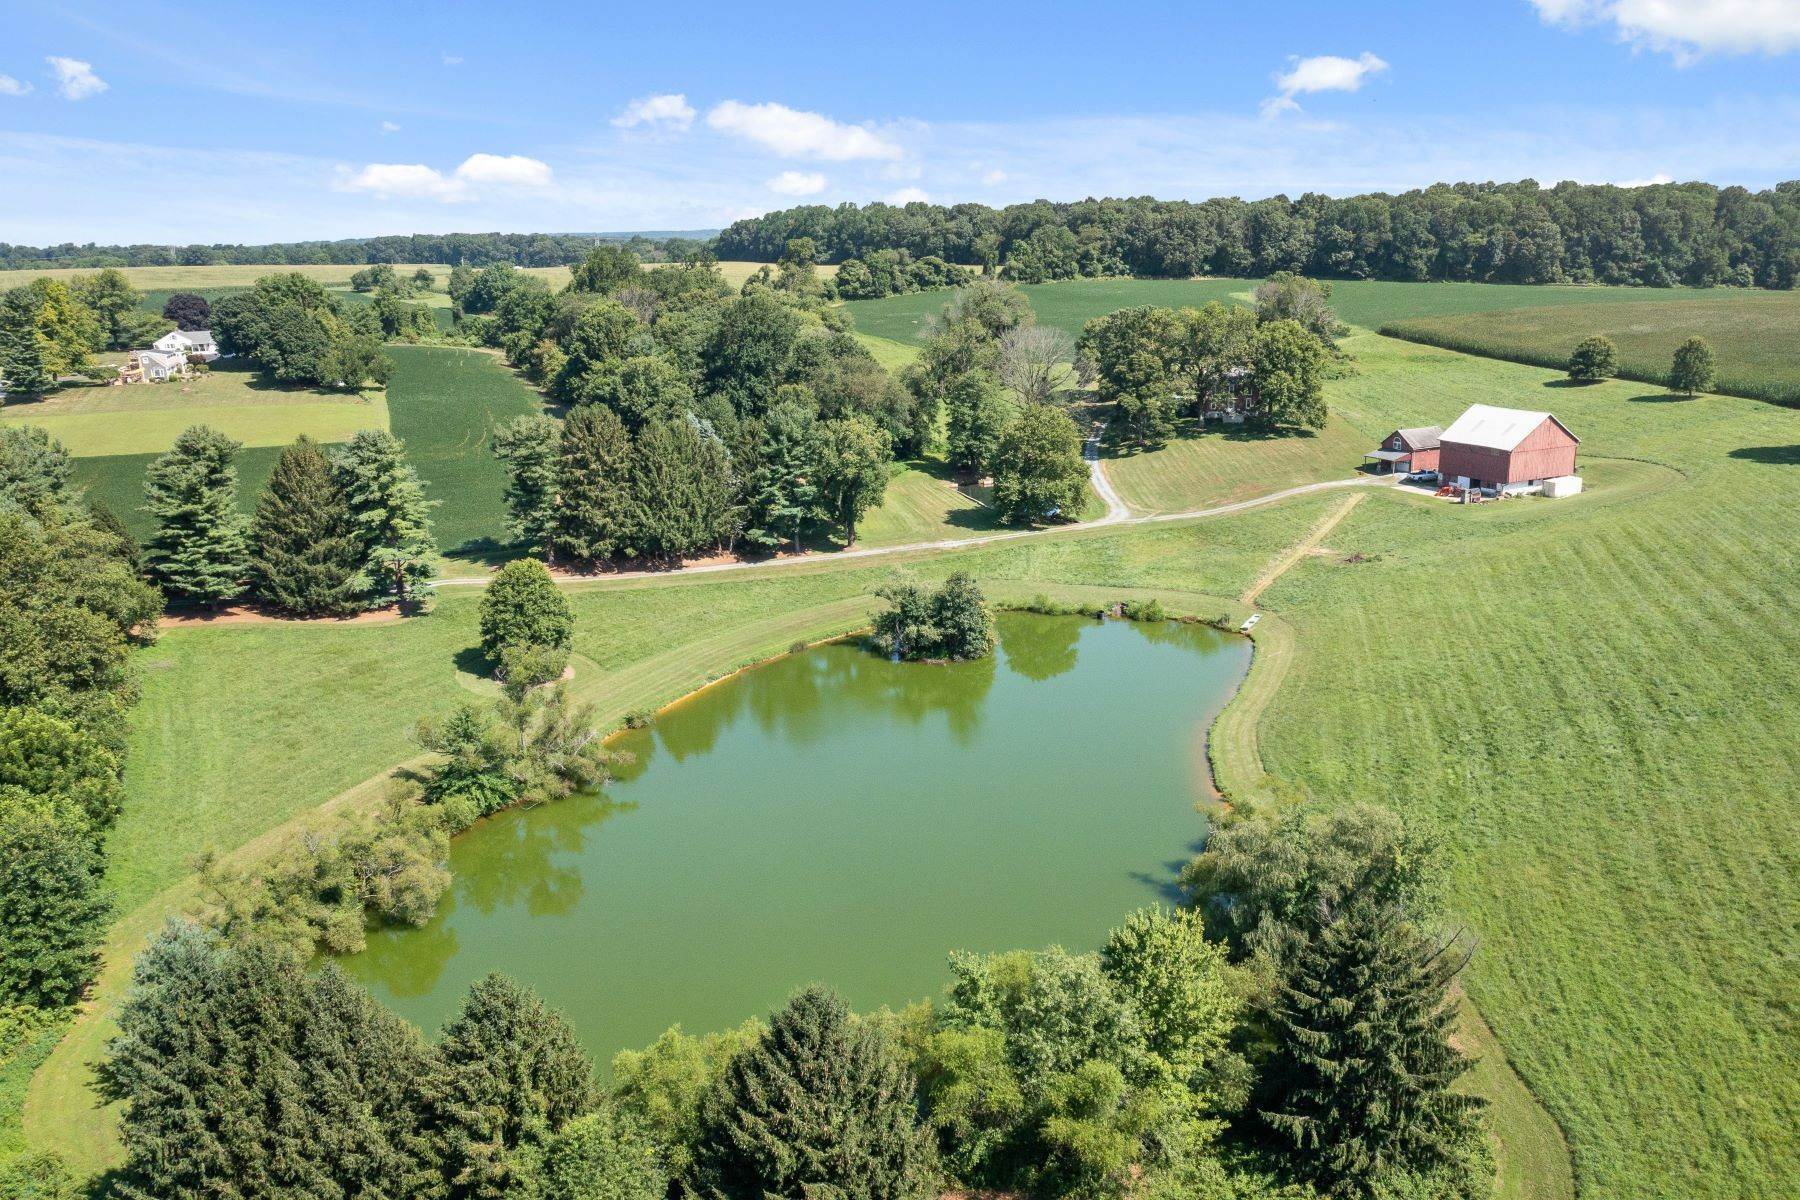 Farm and Ranch Properties for Sale at 259 Old Stottsville Road, Parkesburg, PA 19365 259 Old Stottsville Rd., Parkesburg, Pennsylvania 19365 United States